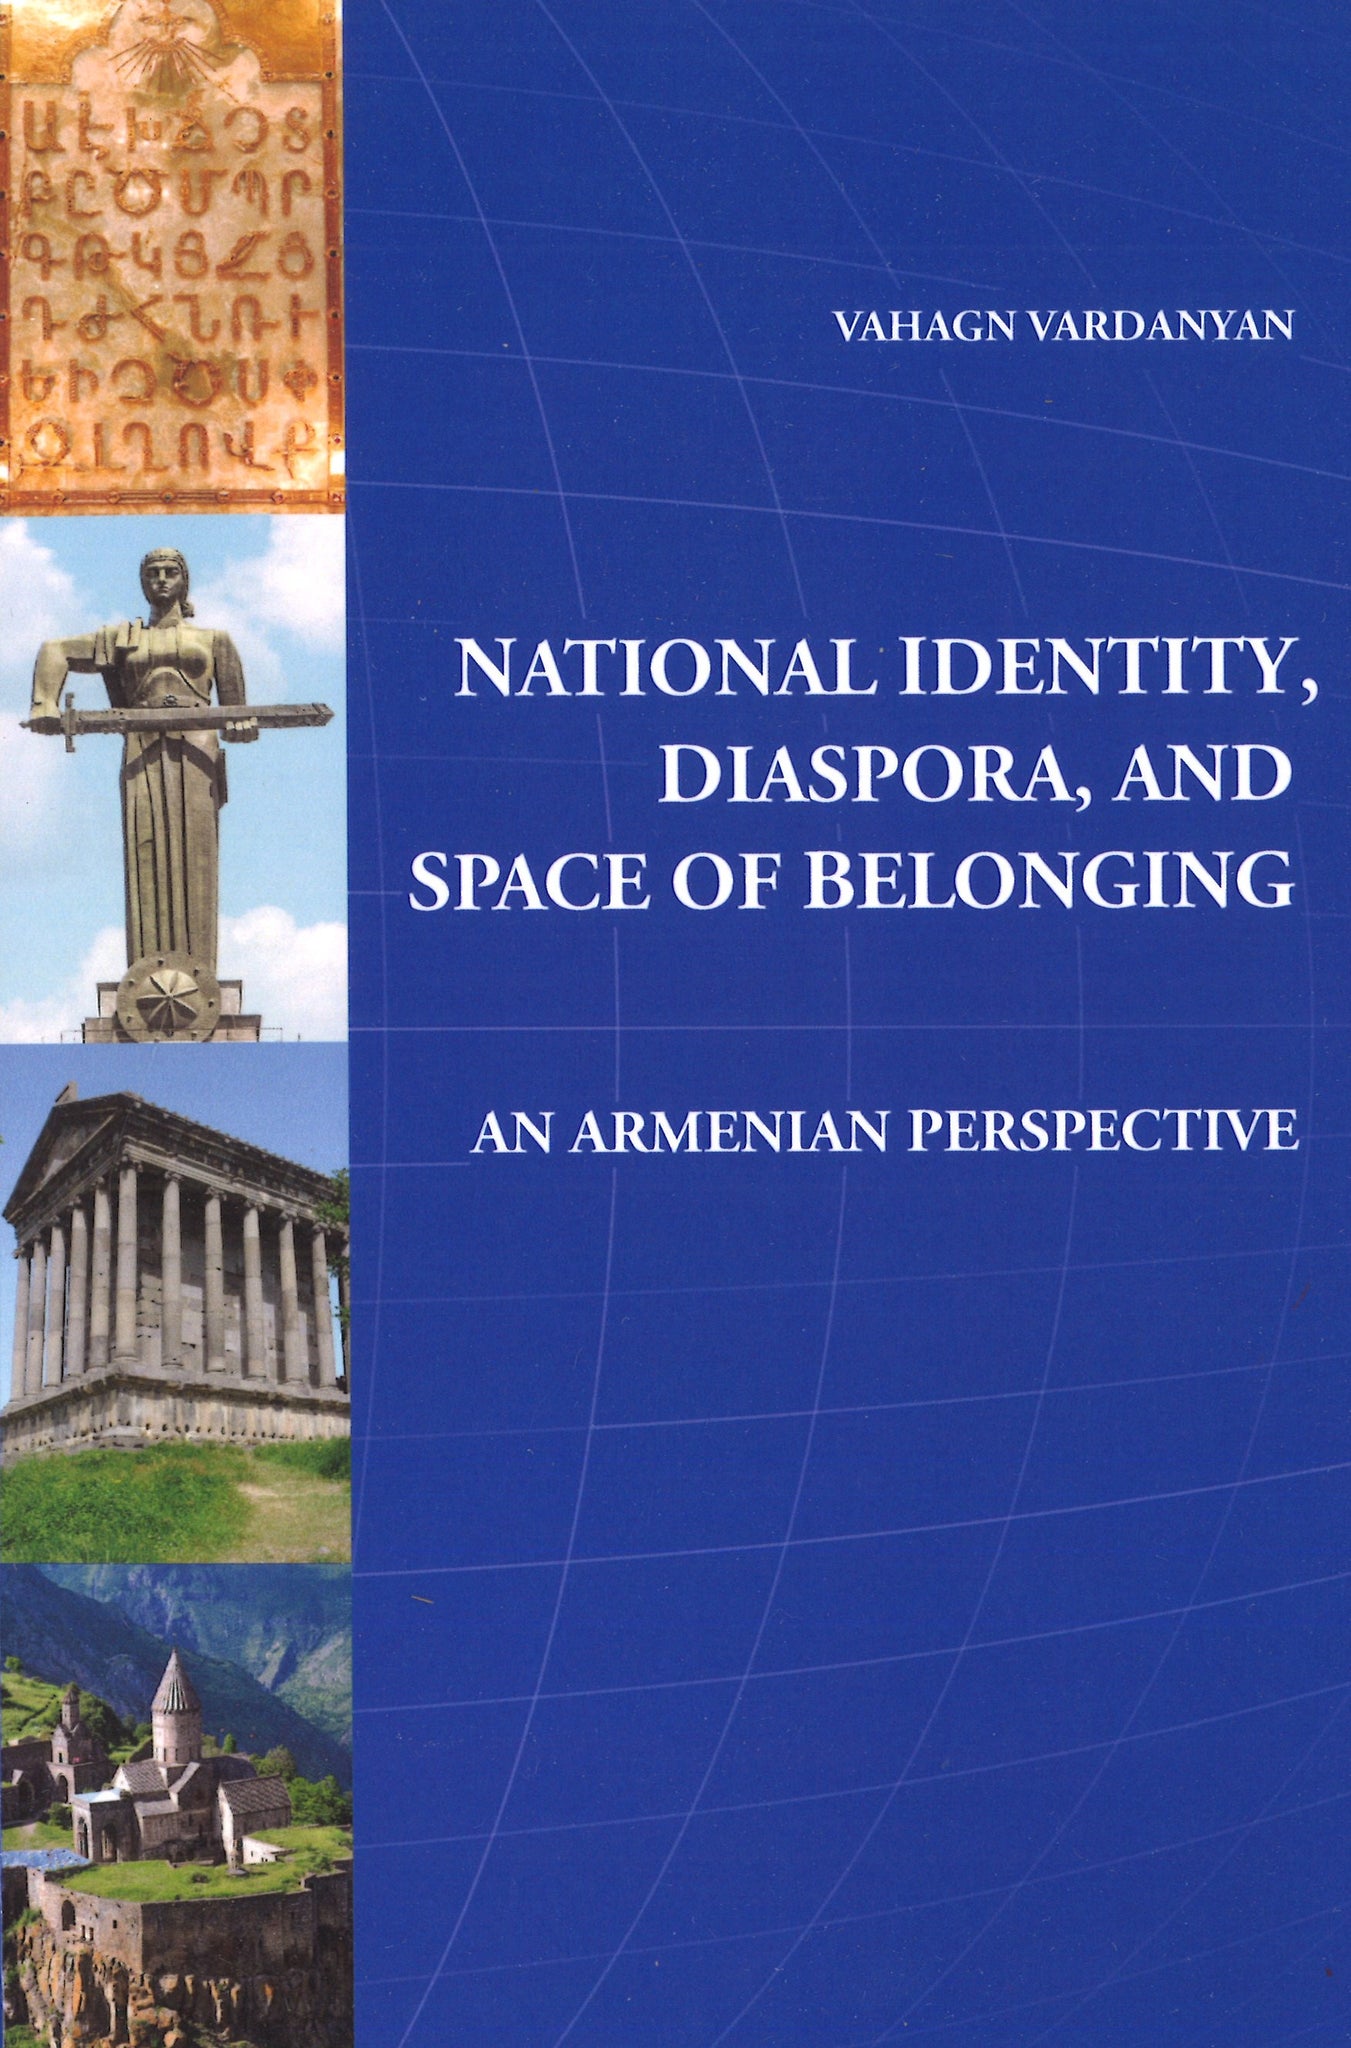 NATIONAL IDENTITY, DIASPORA, and SPACE of BELONGING ~ An Armenian Perspective